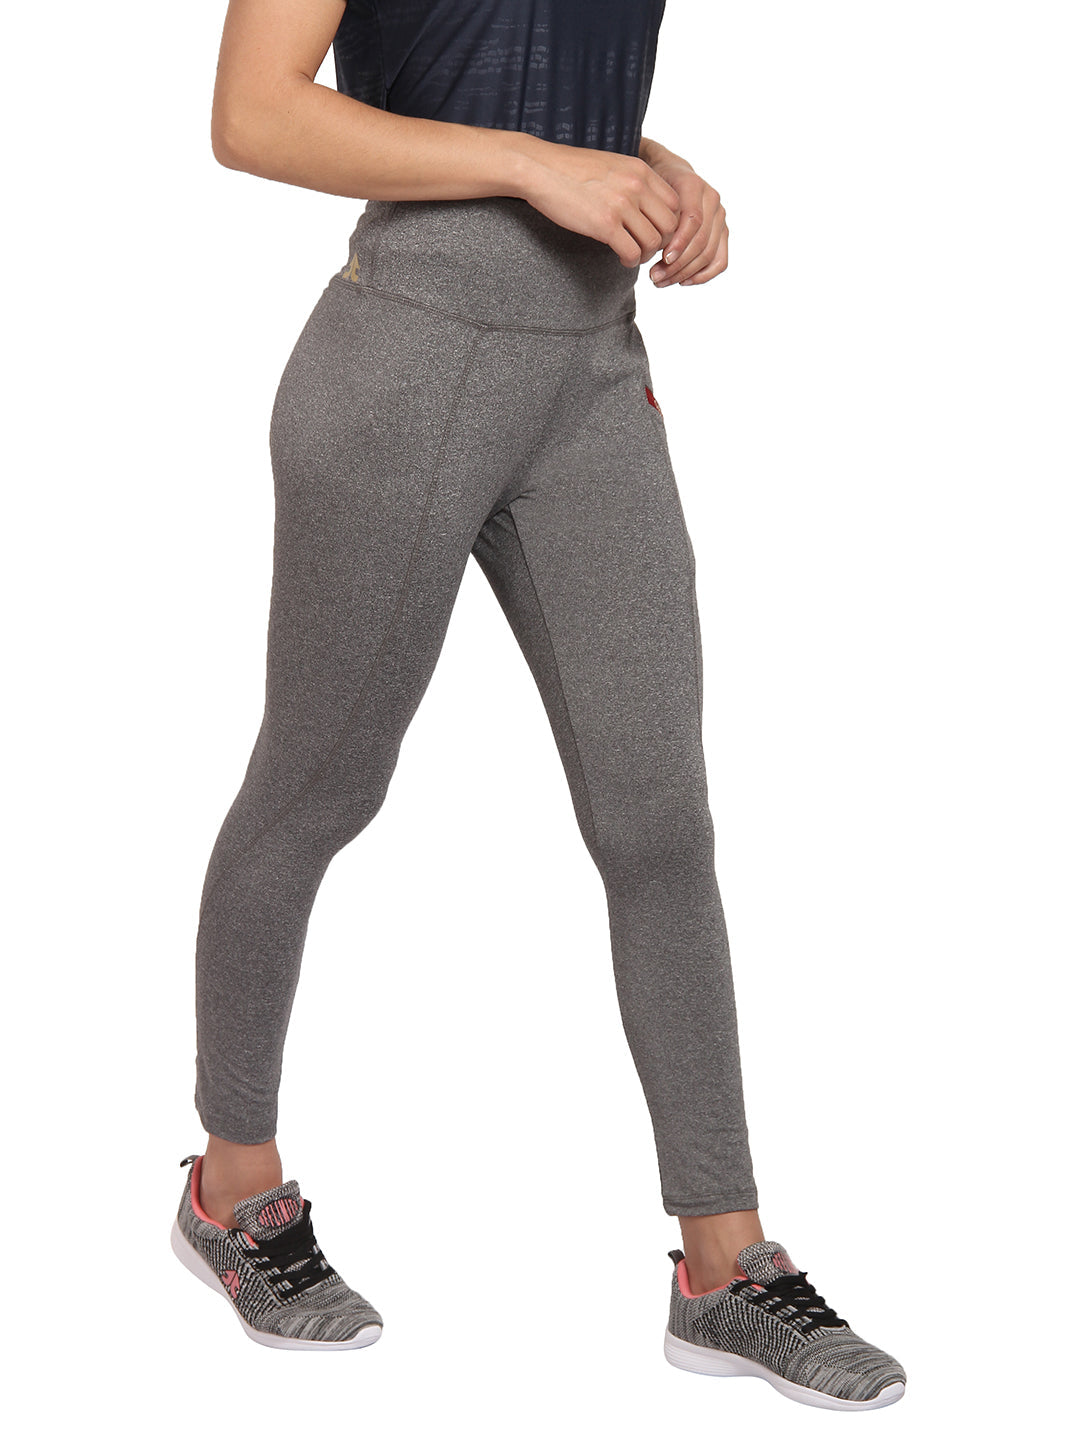 GRINDLE RUNNING TRACK Women Tights